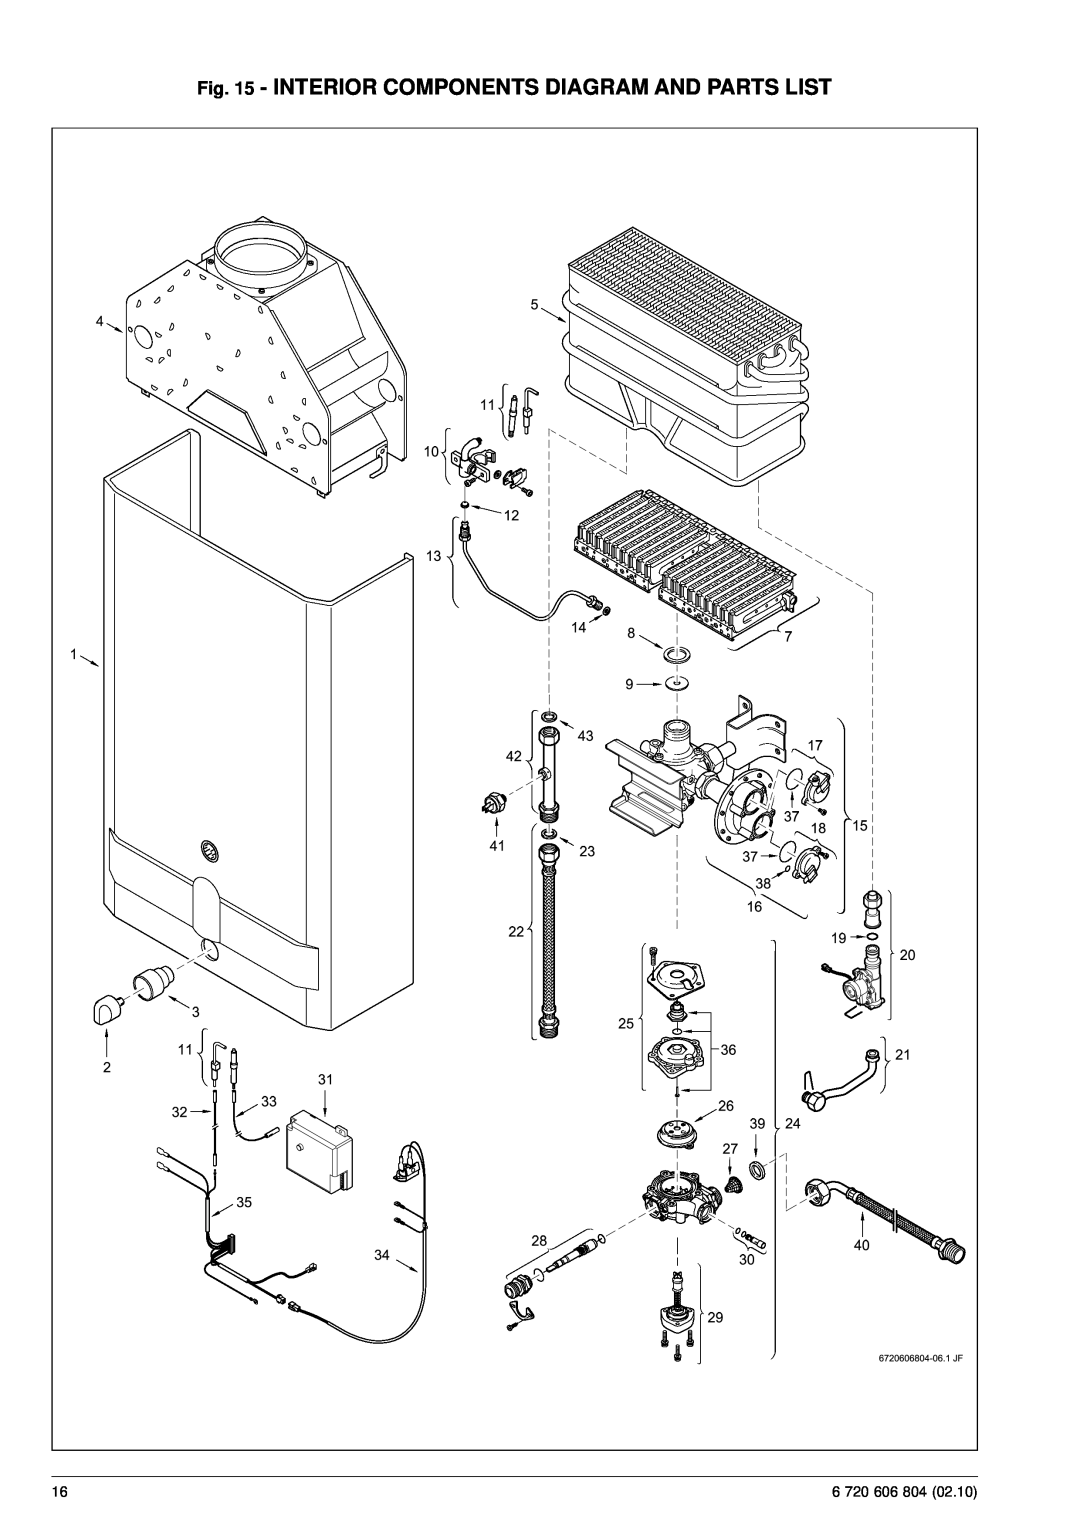 Bosch Appliances 125HX NG specifications Interior Components Diagram And Parts List, 6 720 606 804 